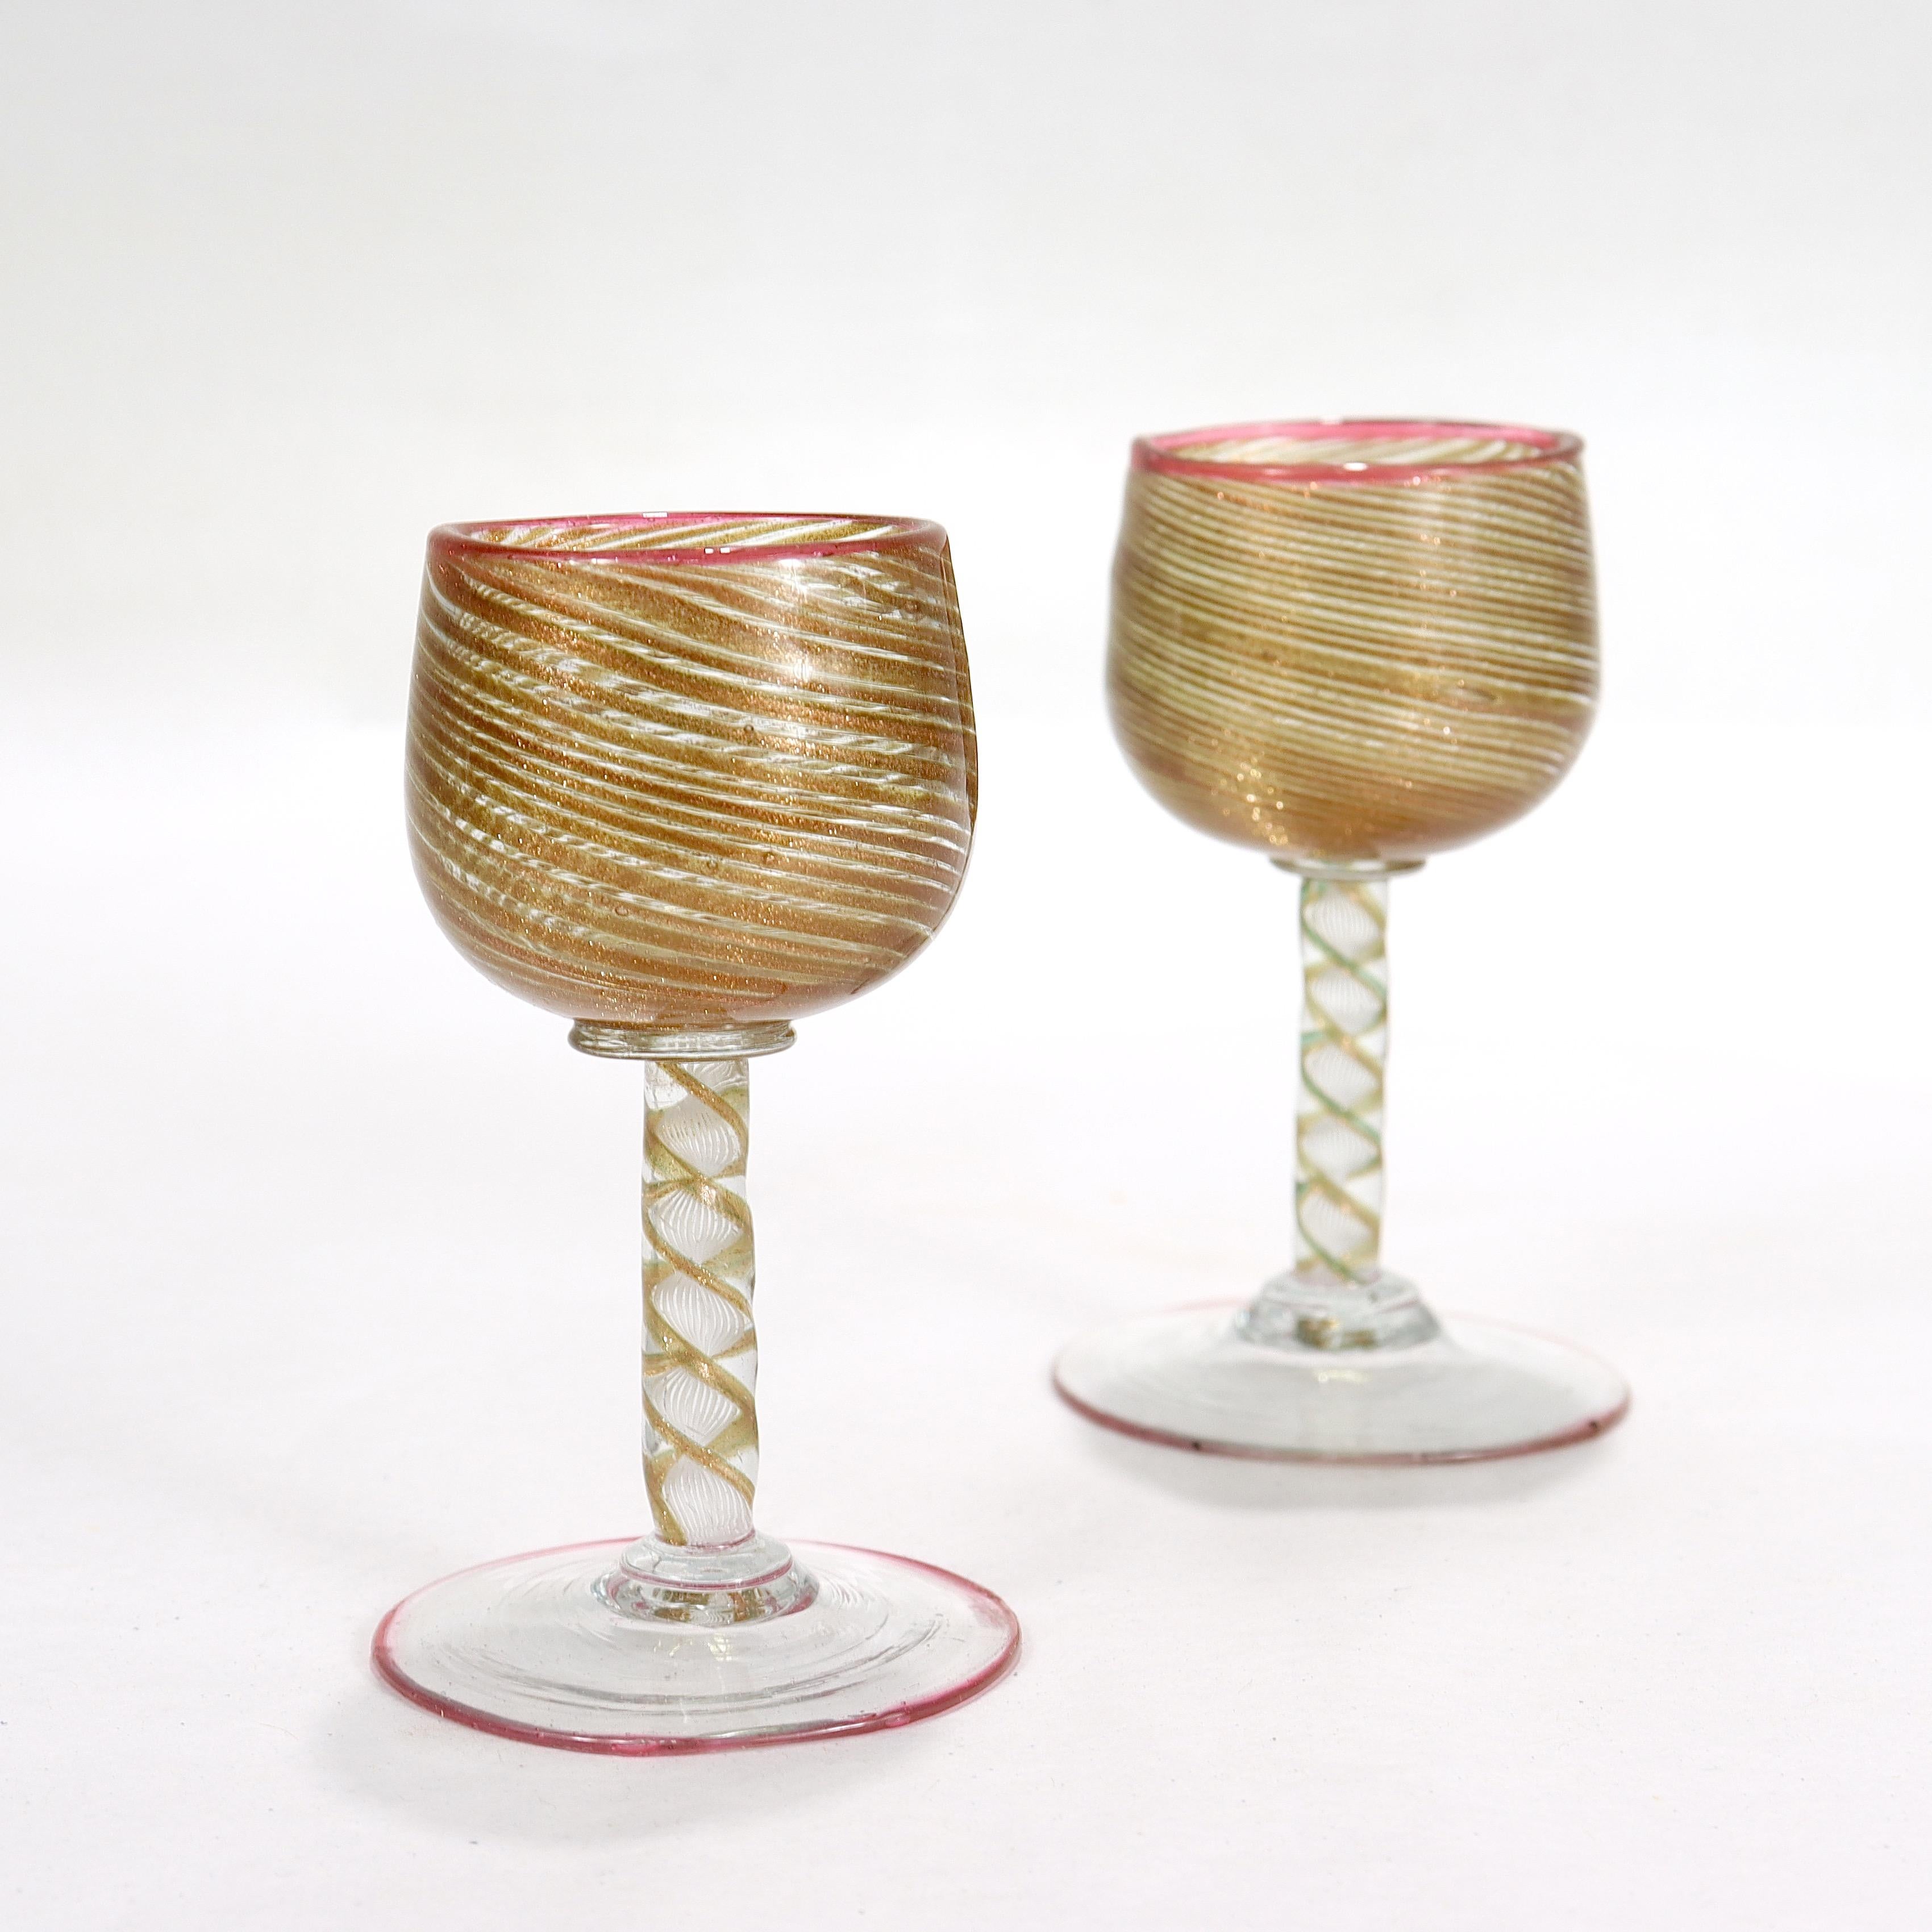 A fine pair of Venetian or Murano glass cordials.

Attributed to Salviati & Co.

With copper aventurine cups supported by a filigrana twist stem and wafer foot.

Both the foot and rim of the cup decorated with a thin applied red thread (one